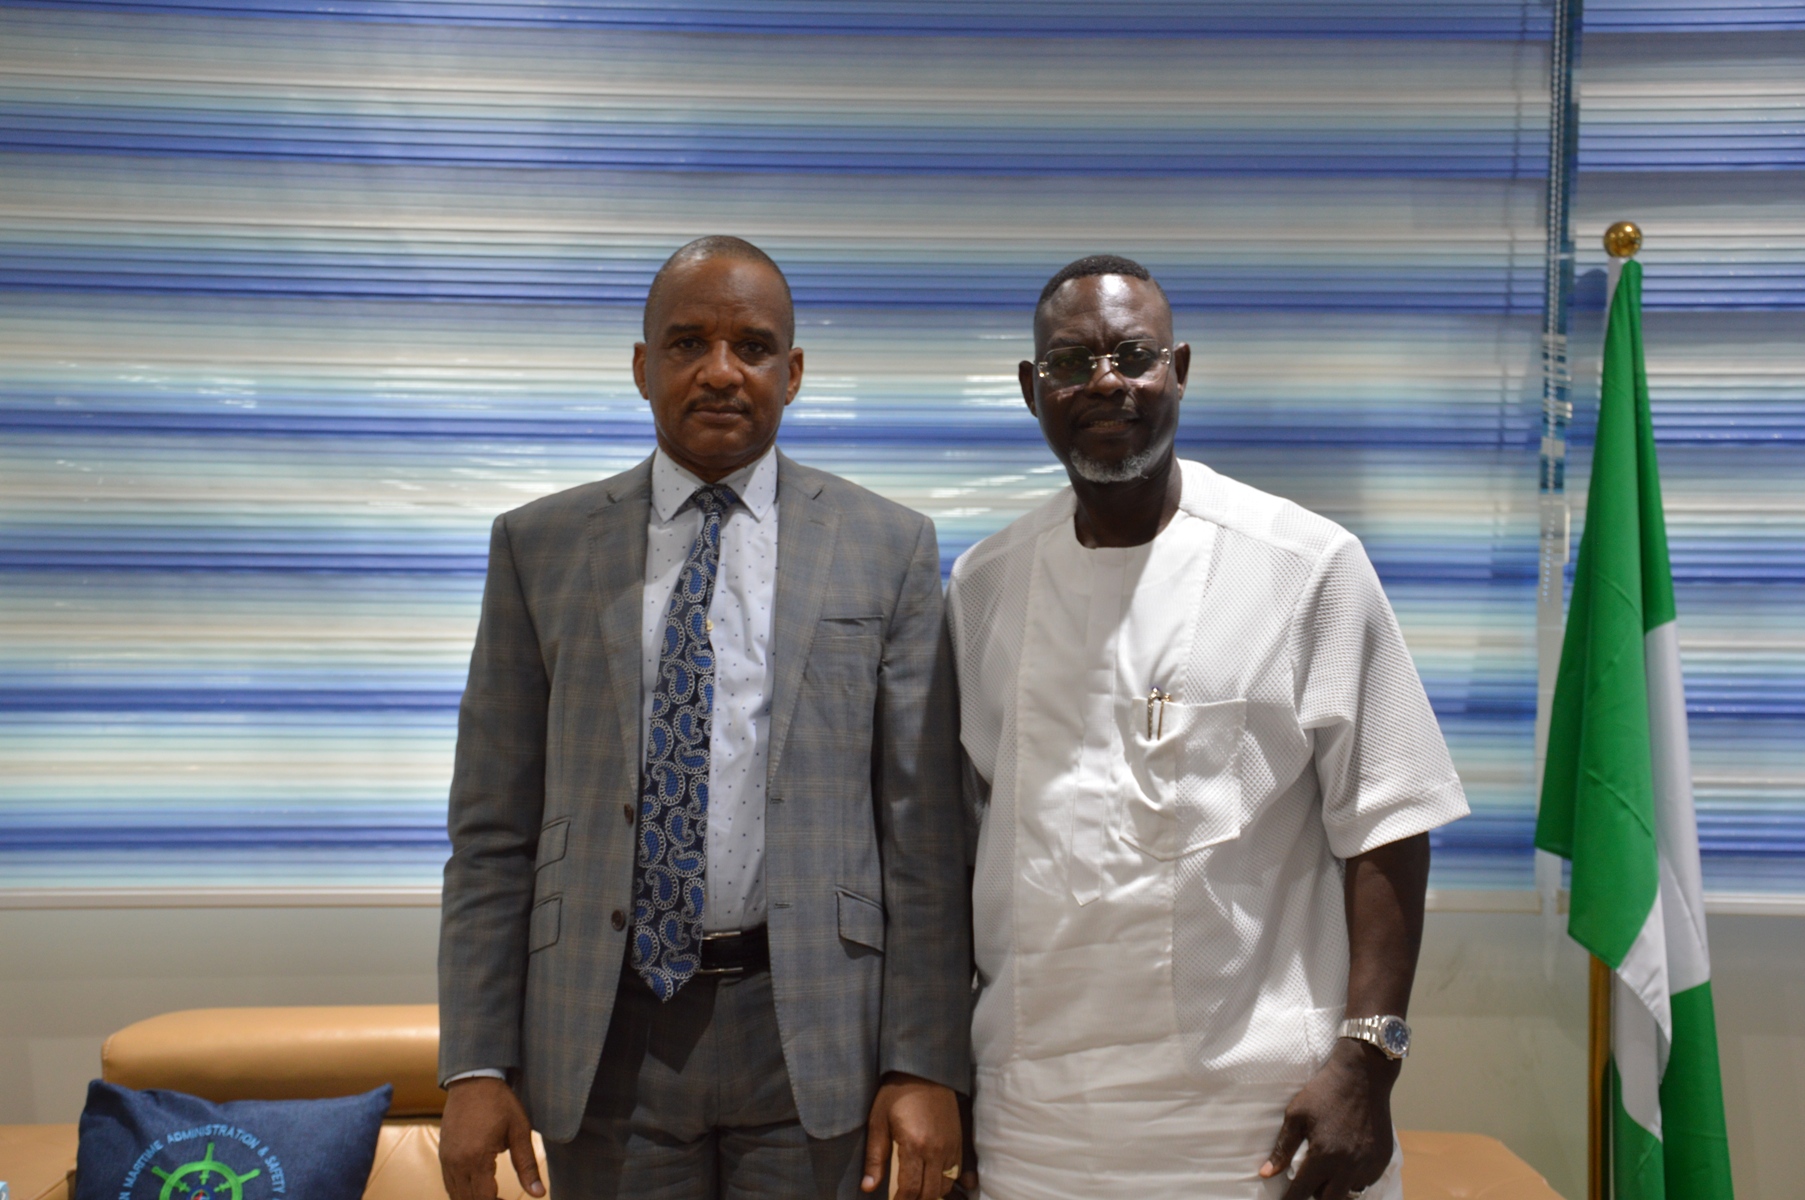 L-R: Dr. Bashir Jamoh, Director General, Nigerian Maritime Administration and Safety Agency with Dr. Taiwo Afolabi, Group Executive Vice Chairman, SIFAX Group during a courtesy visit by the SIFAX Group boss to the NIMASA DG held at the Agency’s head office, Apapa. At the visit, SIFAX Group and NIMASA agreed to explore opportunities for a better working relationship and the continued growth of the country’s maritime sector.